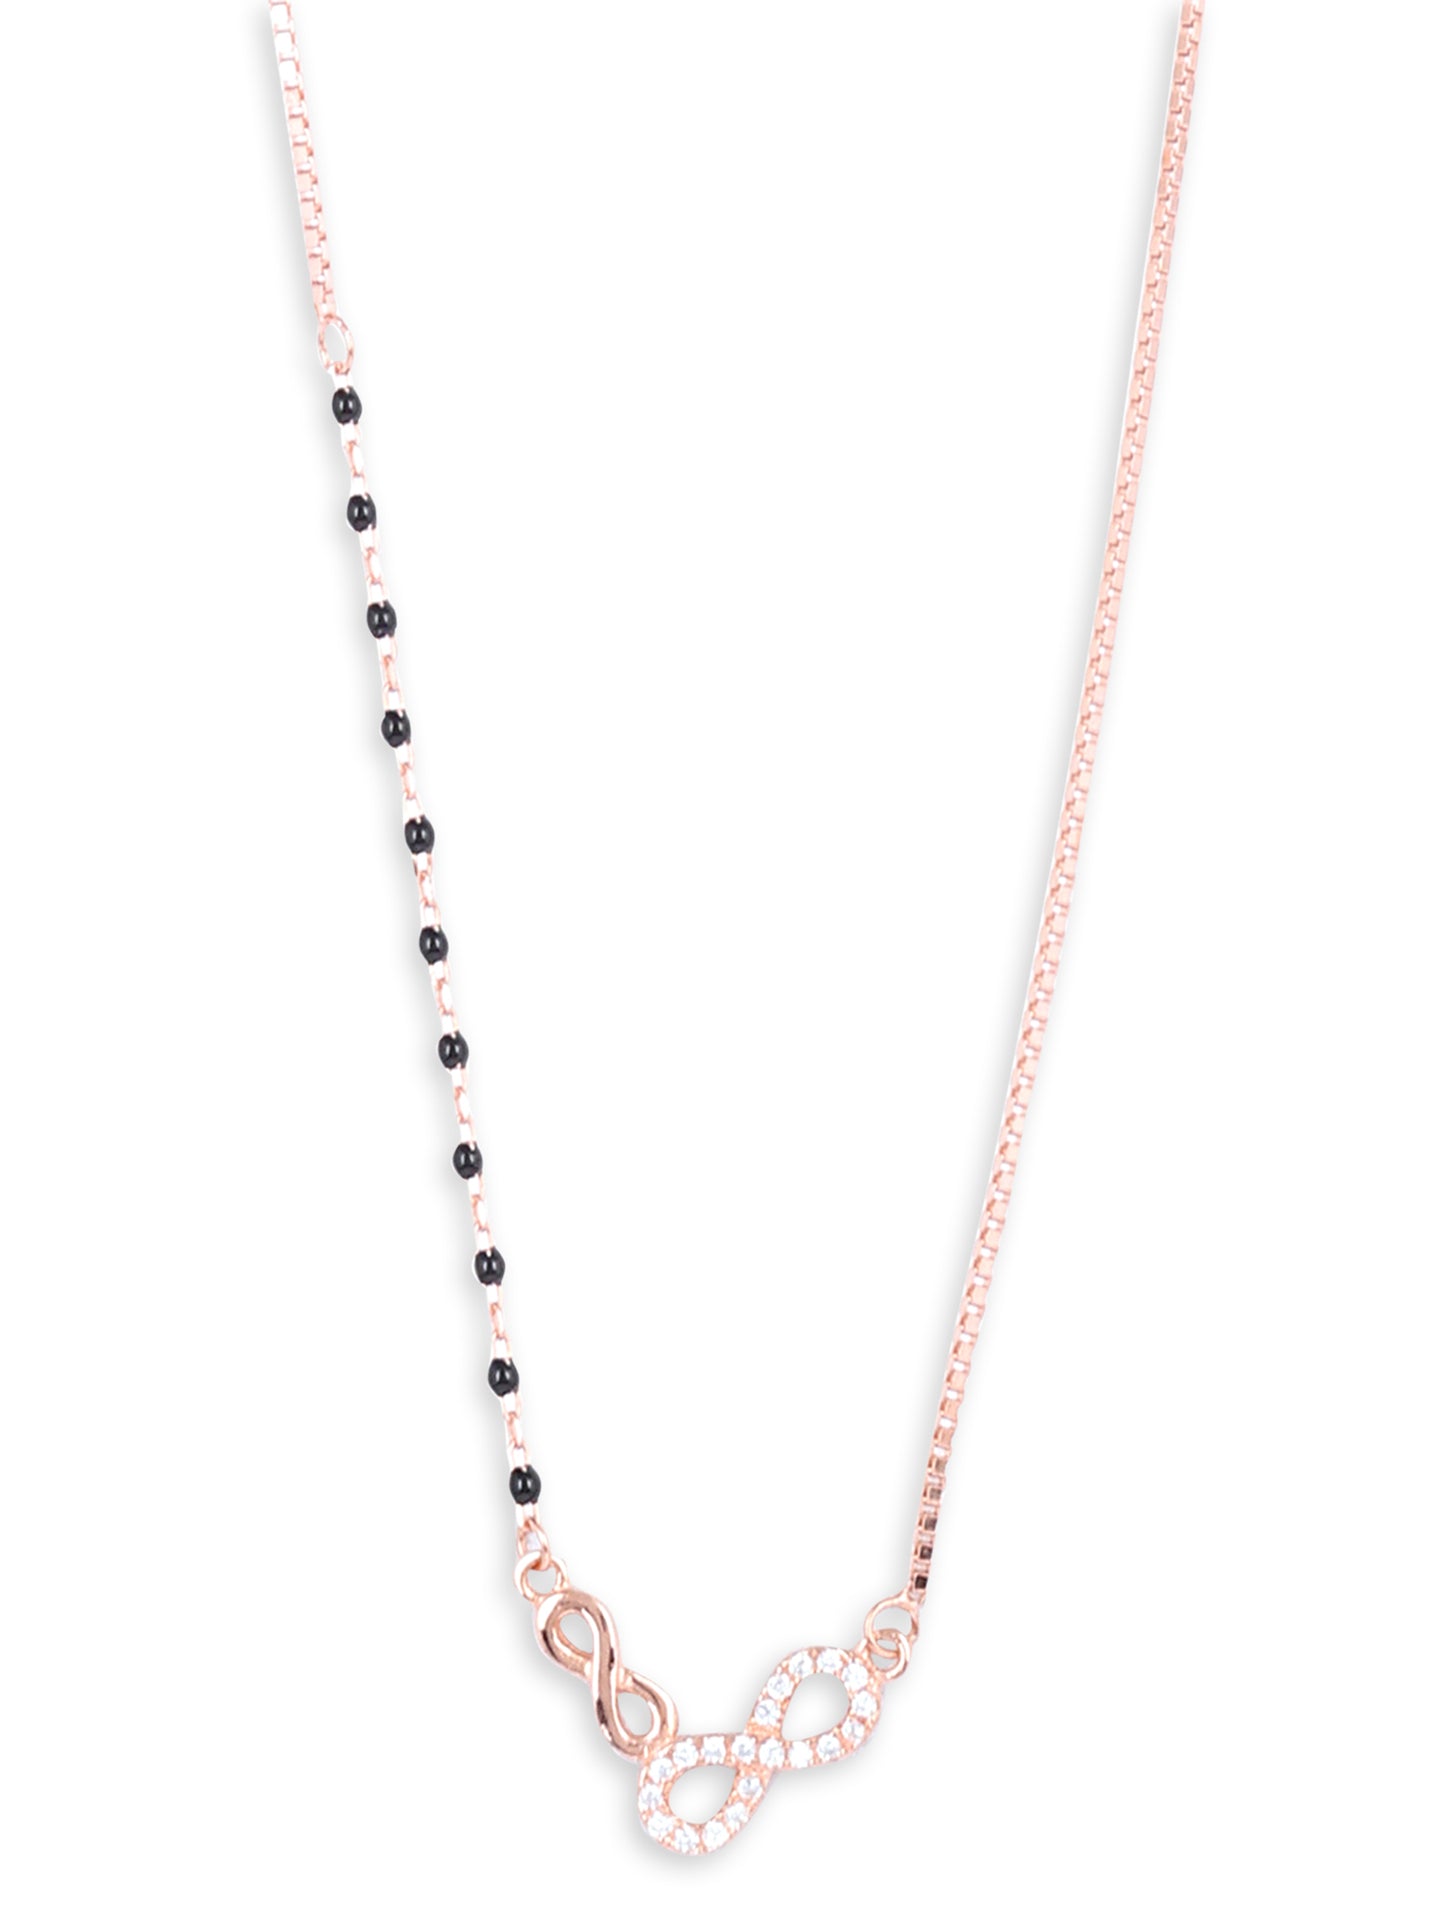 Infinity Black rose gold pendant with chain